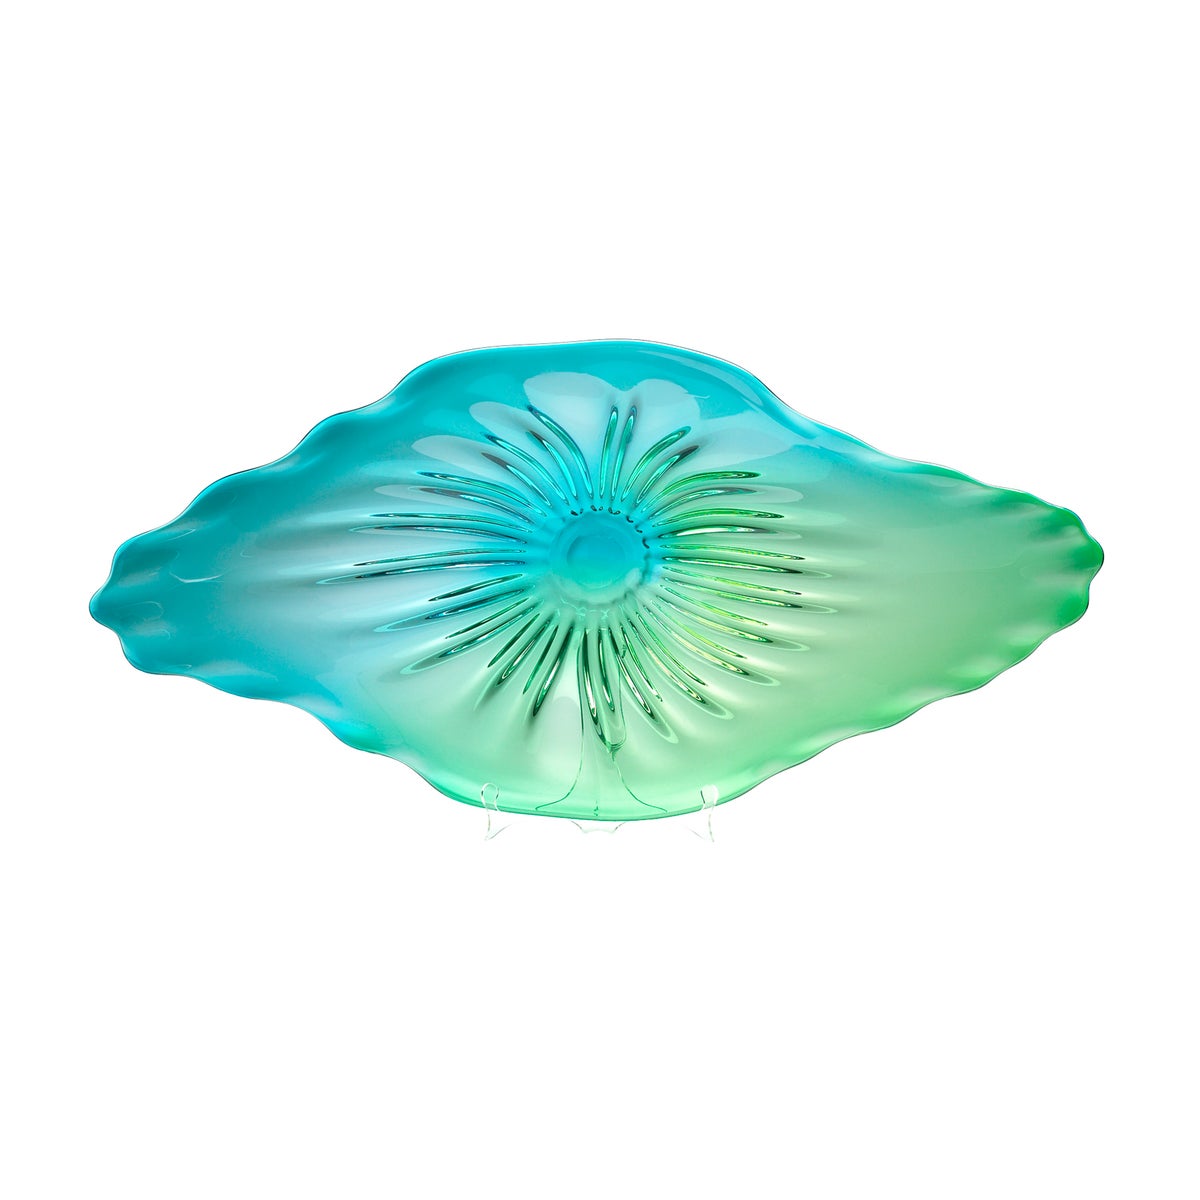 Art Glass Plate | Turquoise